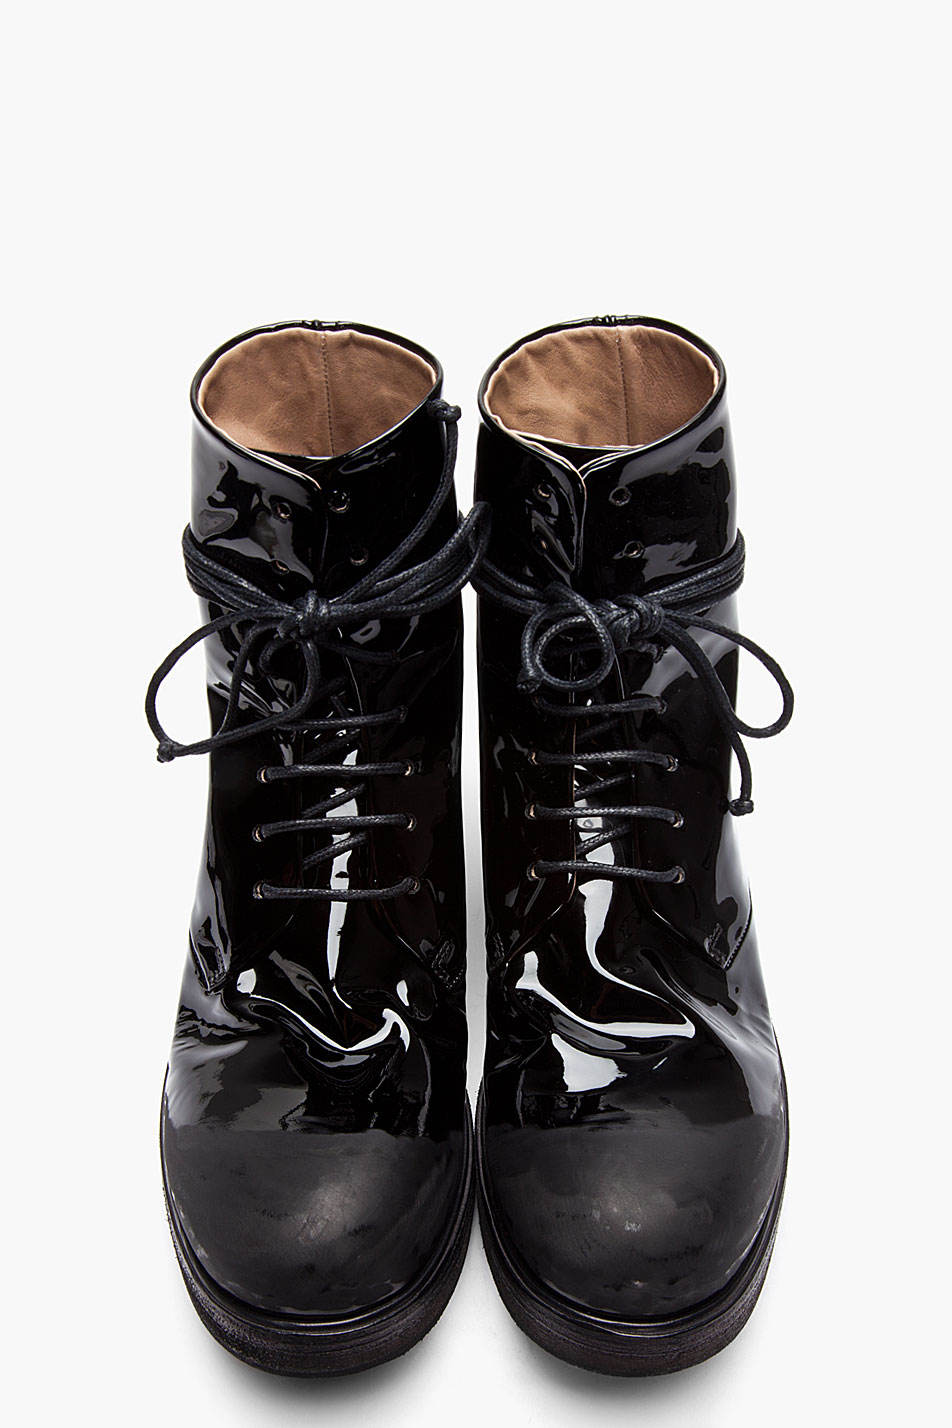 Patent Leather Matte Toecap Boots Marsell 3